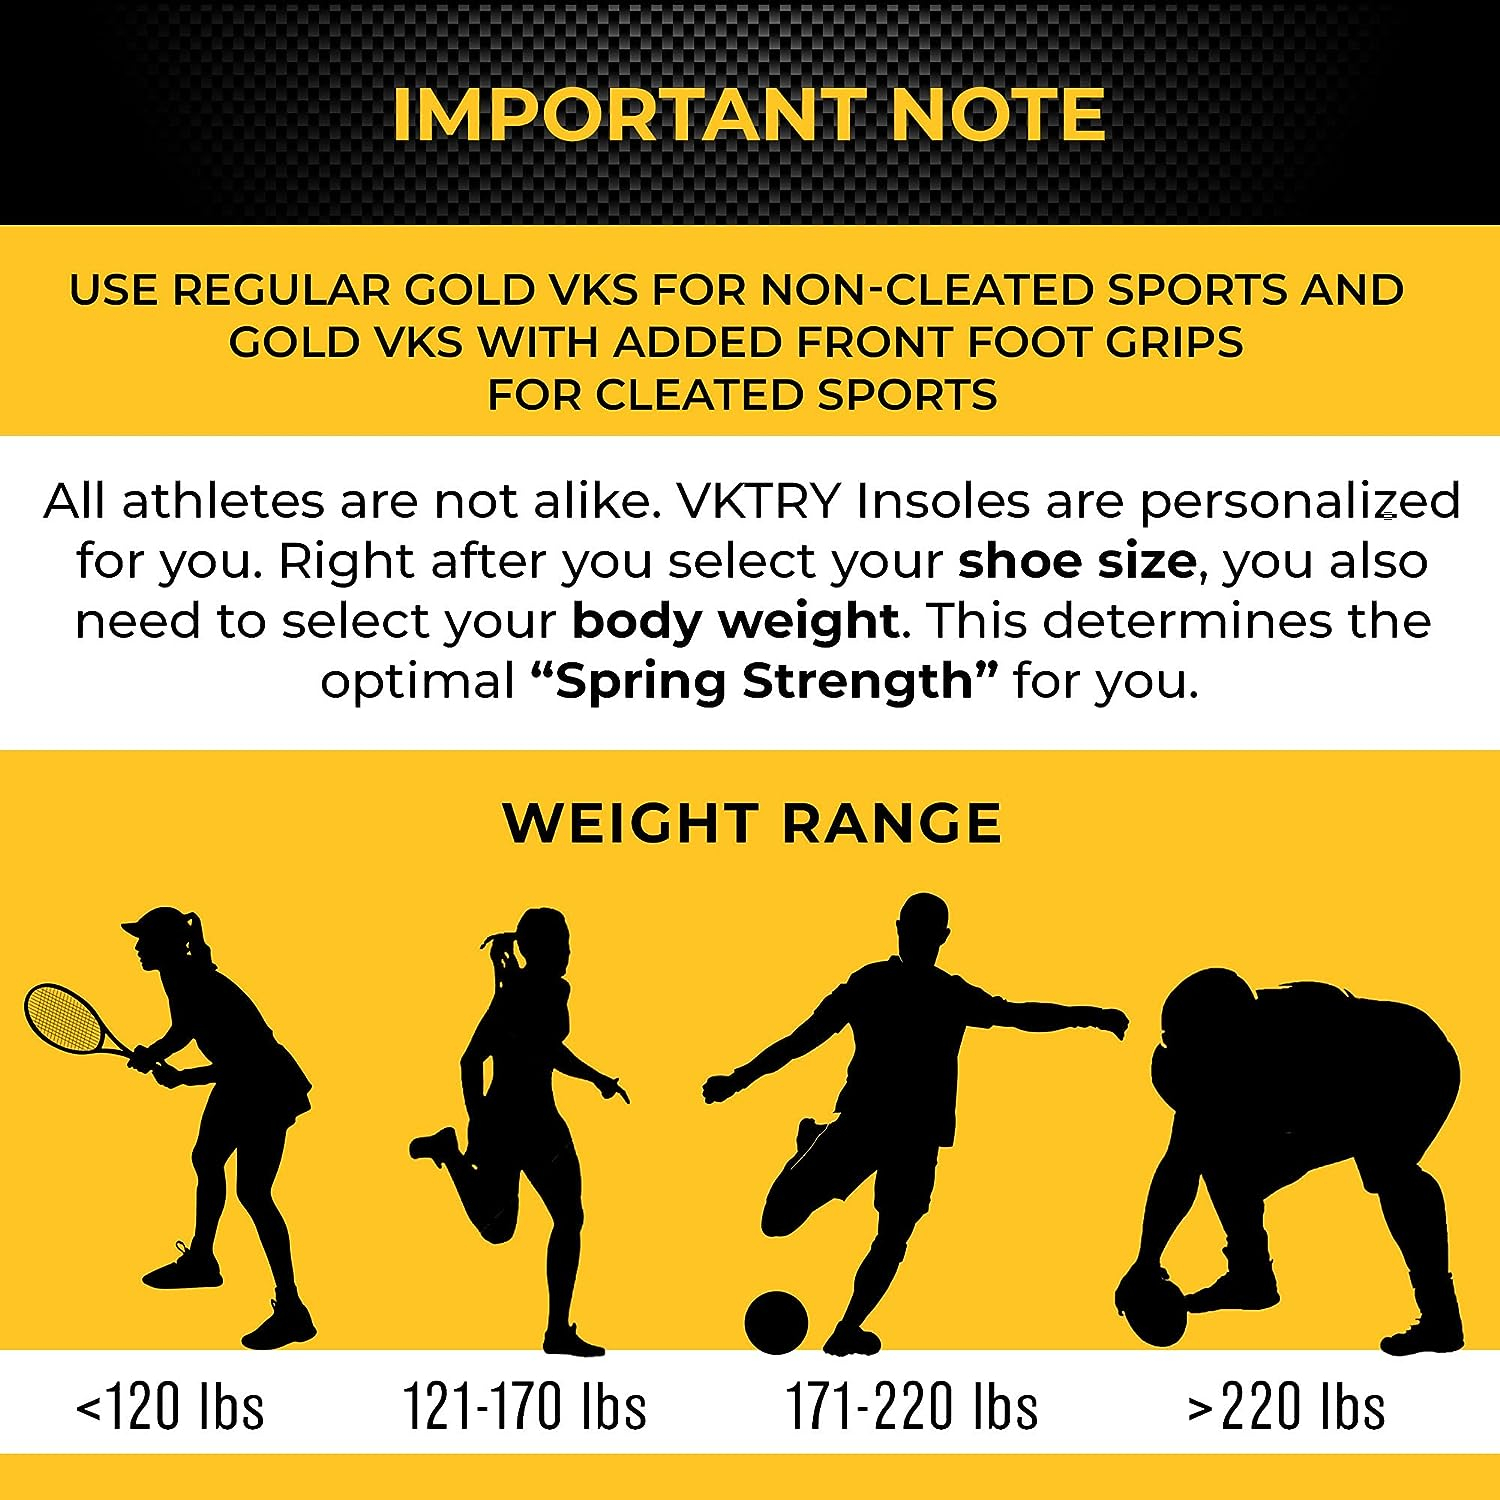 VKTRY Performance Insoles - Gold VKs - Carbon Fiber Shock Absorbing Sport Shoe Insoles for Pro Running, Basketball, Athletics - Jump Higher, Improved Explosiveness, Injury Protection and Recovery